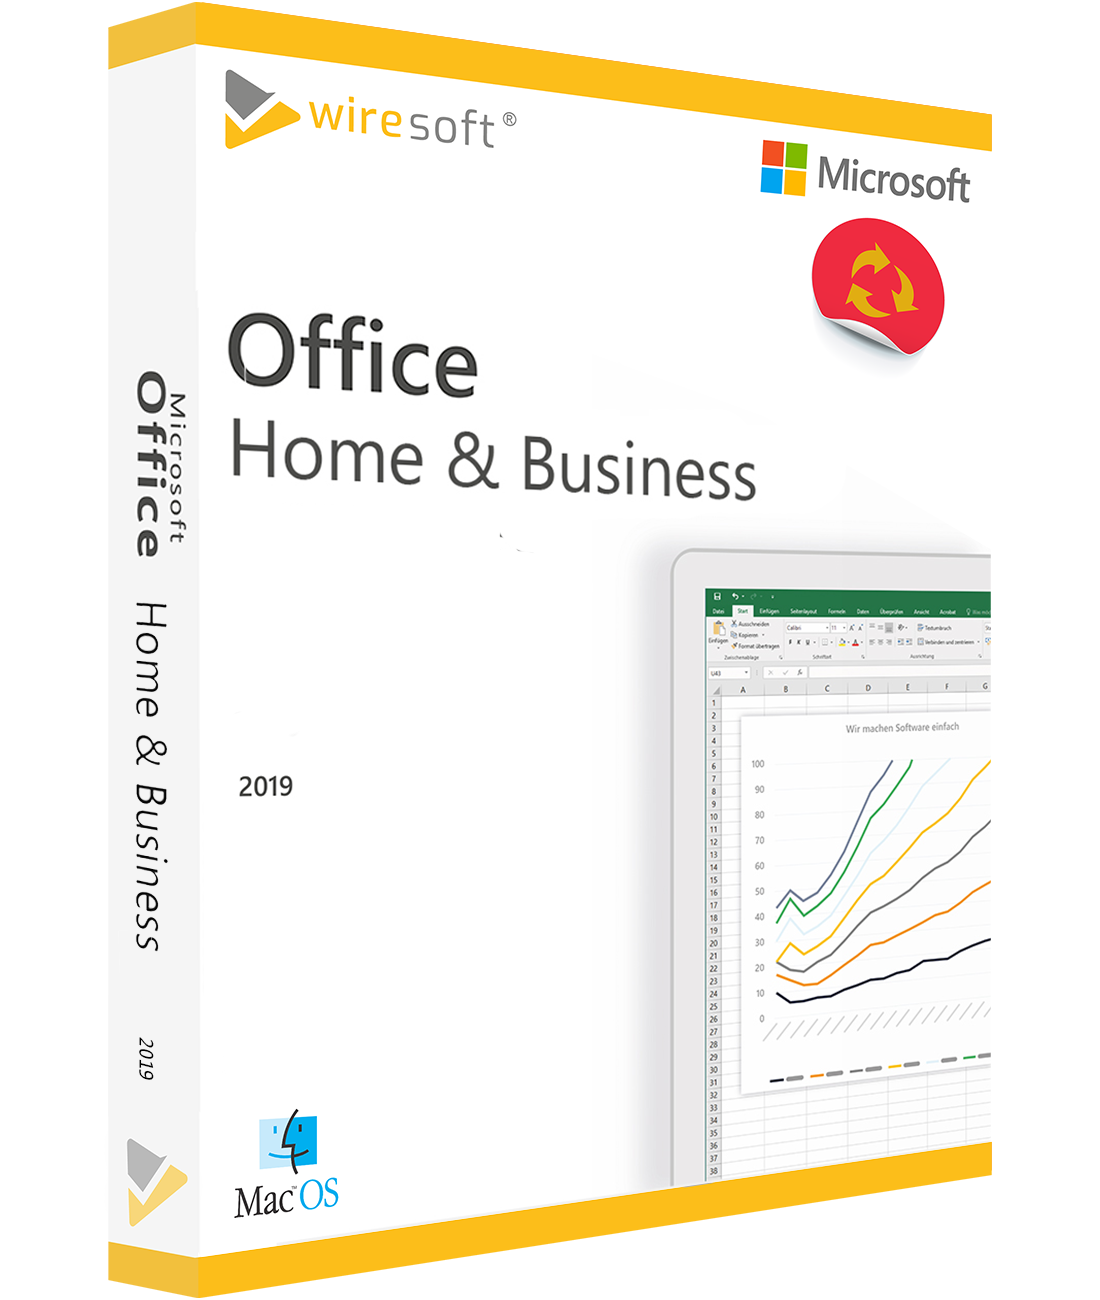 upgrade office 2013 to 2016 free home use